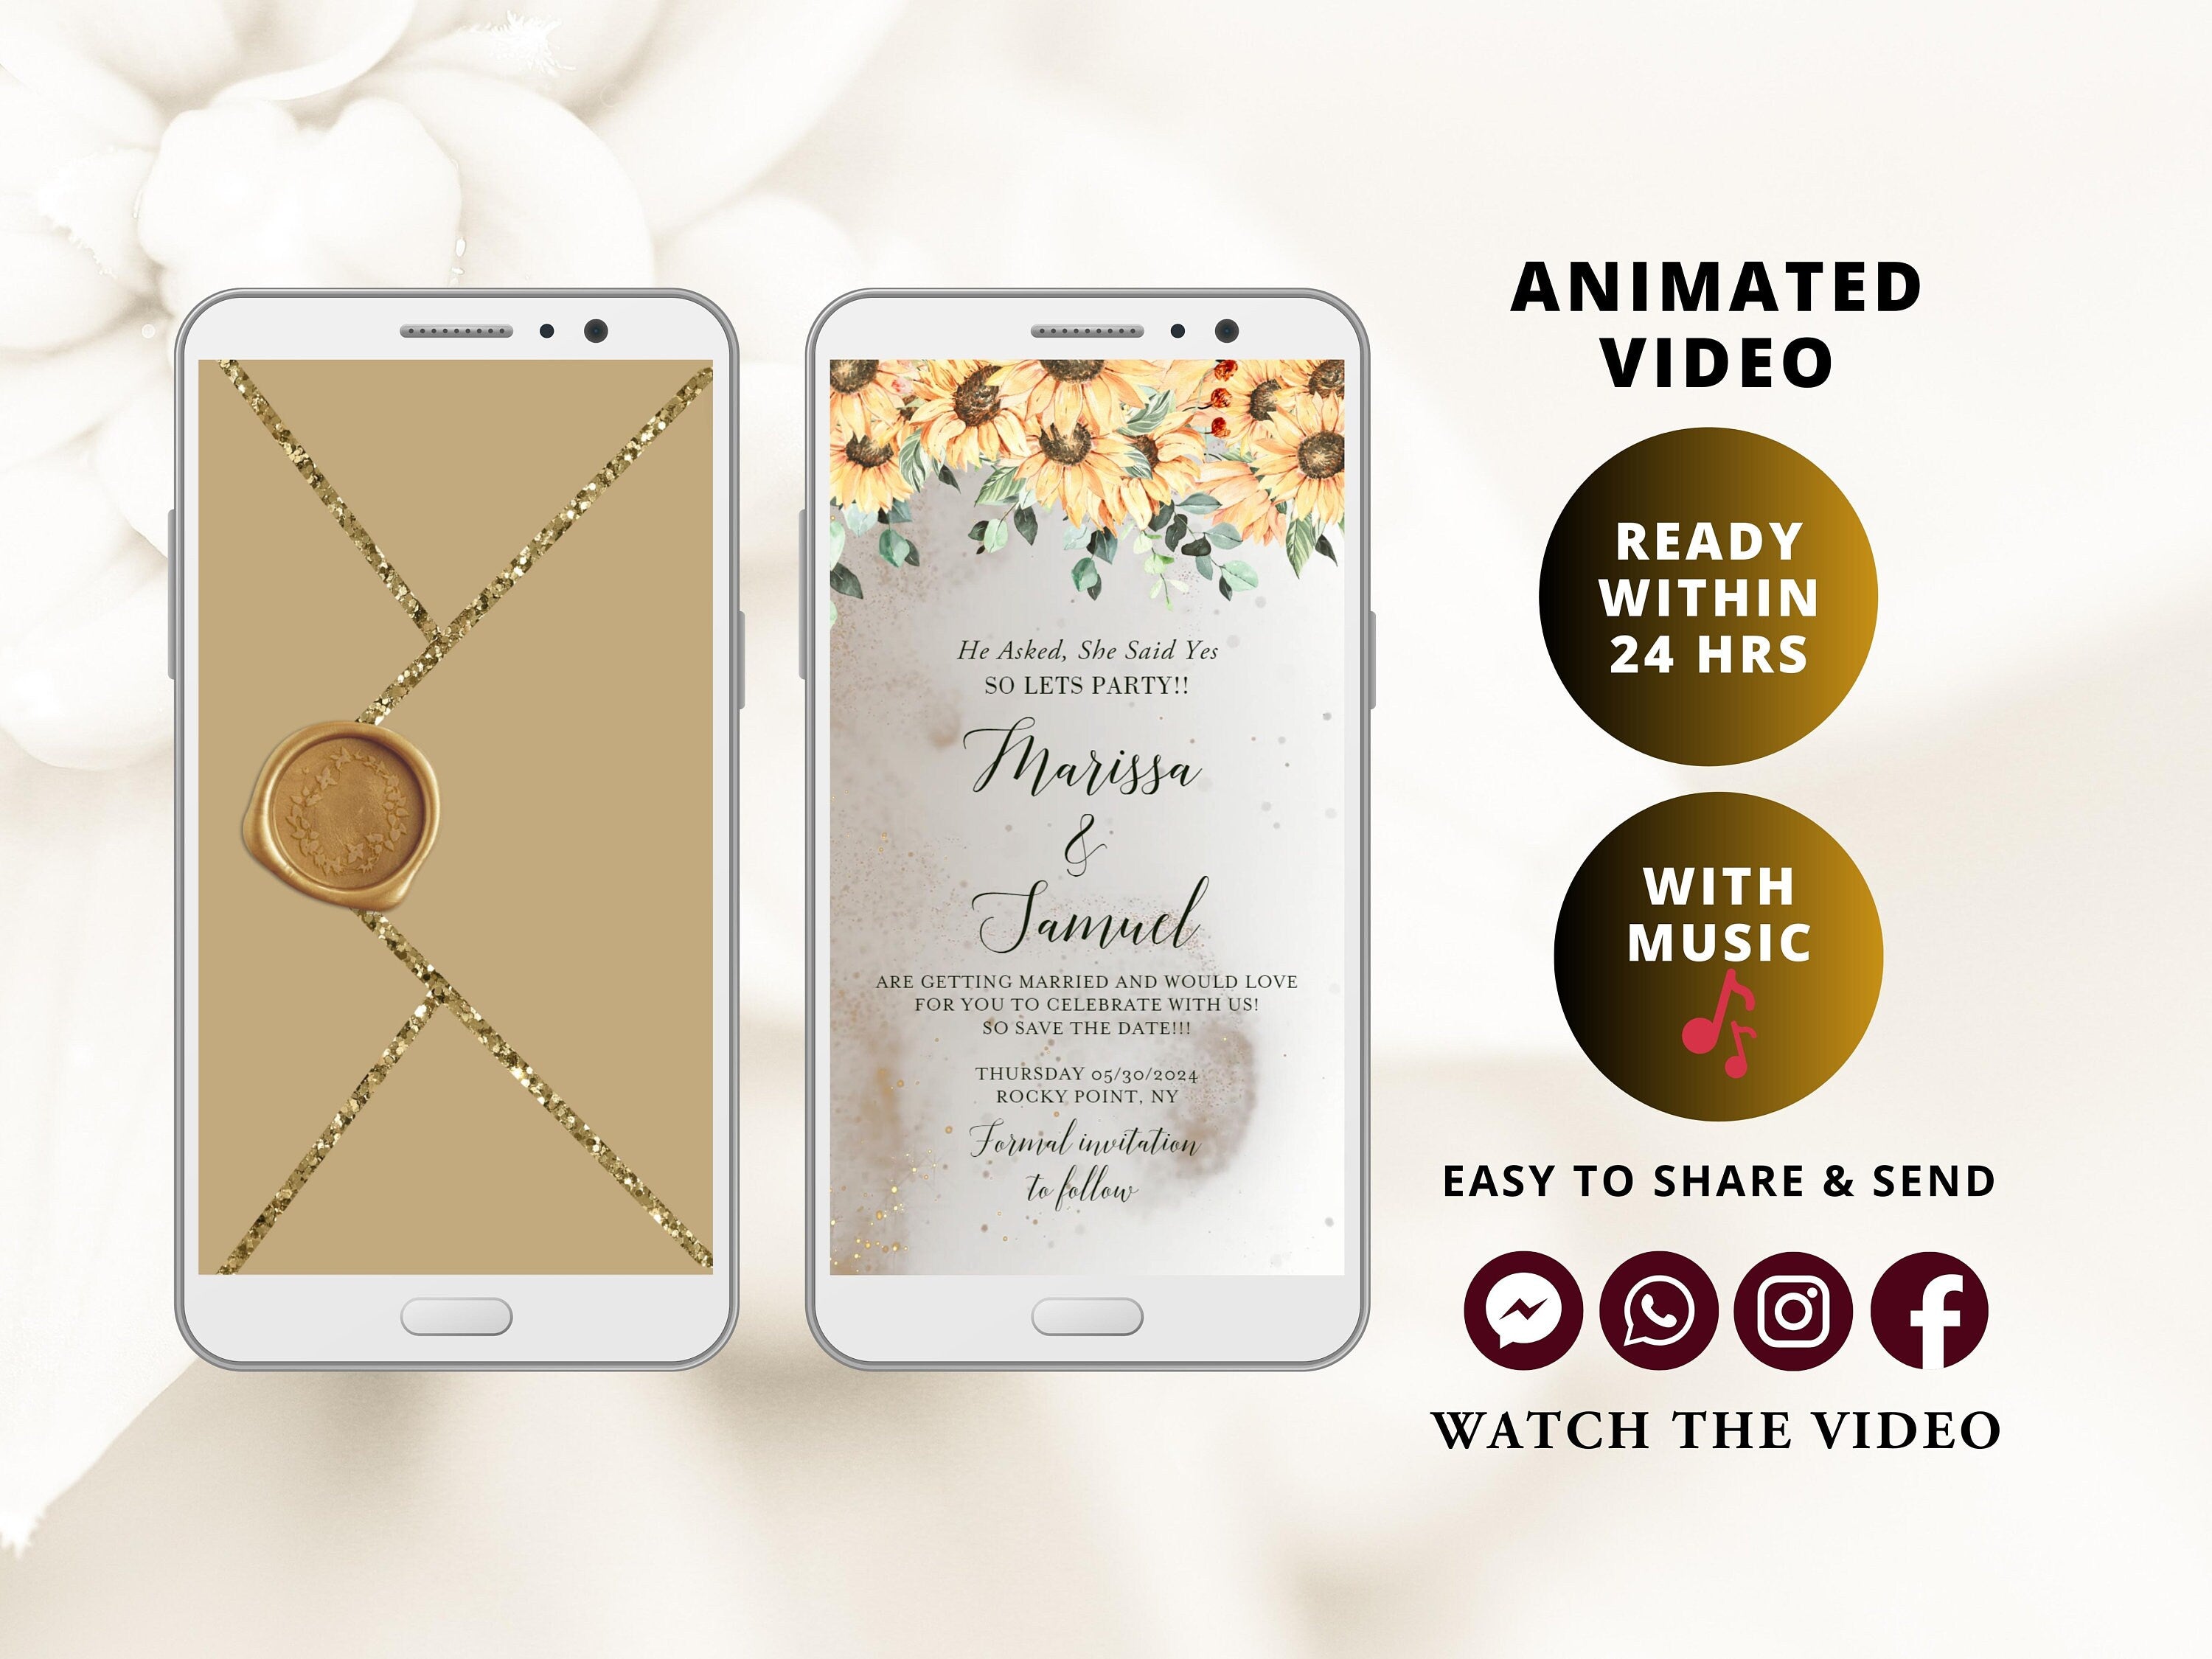 Digital Wedding Invitation with glitter dust and sunflowers, electronic wedding invite with opening gold envelope and digital stamp